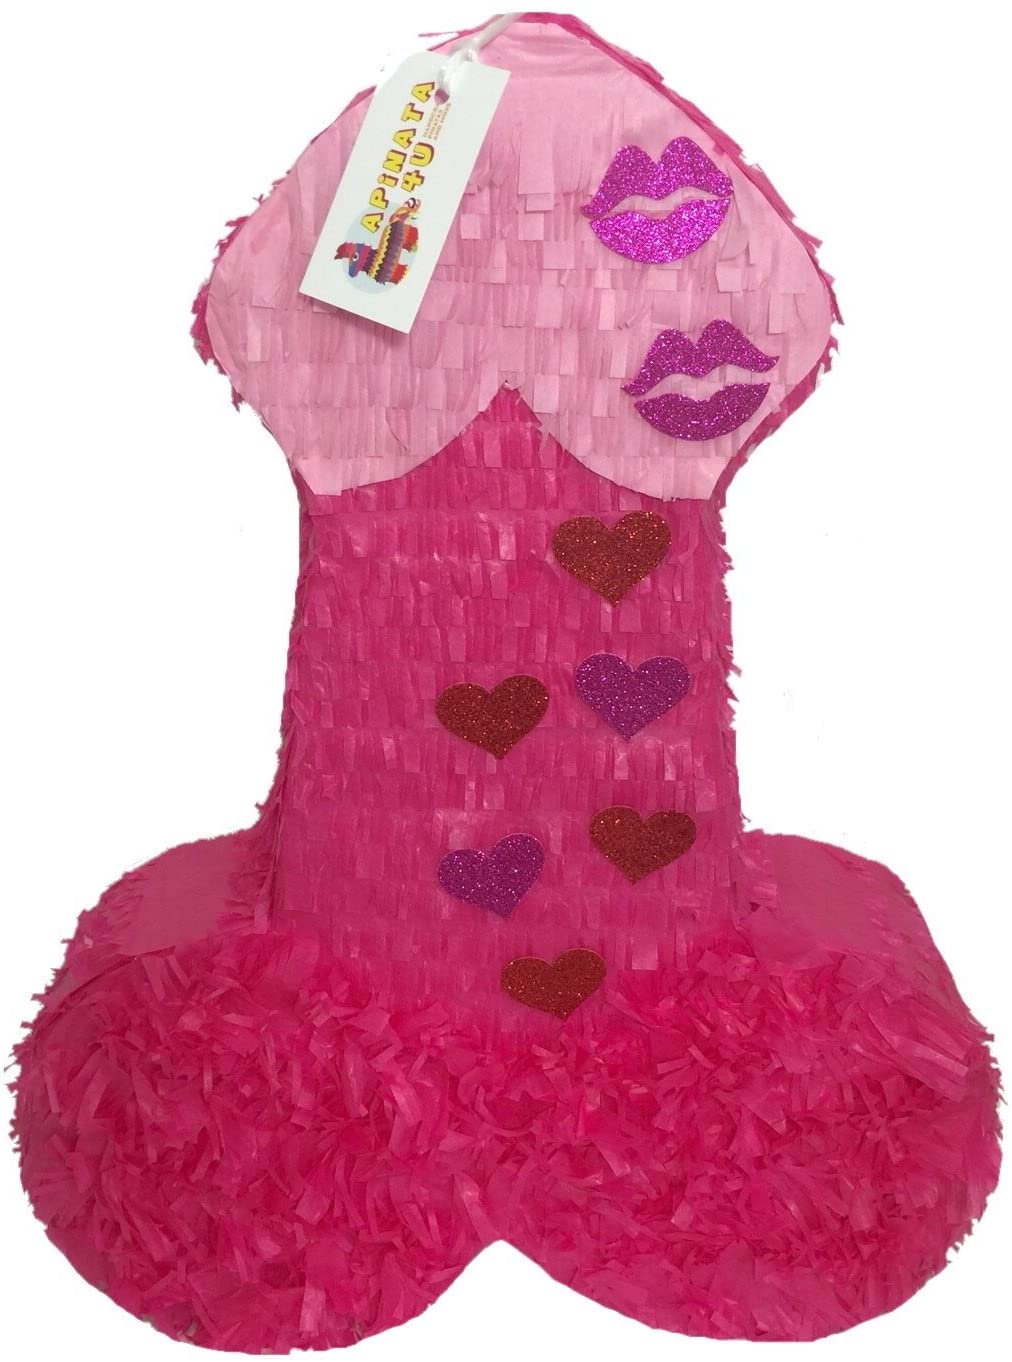 APINATA4U LLC - Large Penis Adult Pinata | Hot Pink with Glitter Kisses | Ideal for Bachelorette Party | Made with High Quality Cardboard | Party & Game | Size - 2ft Approx | Easy to Use & Fill